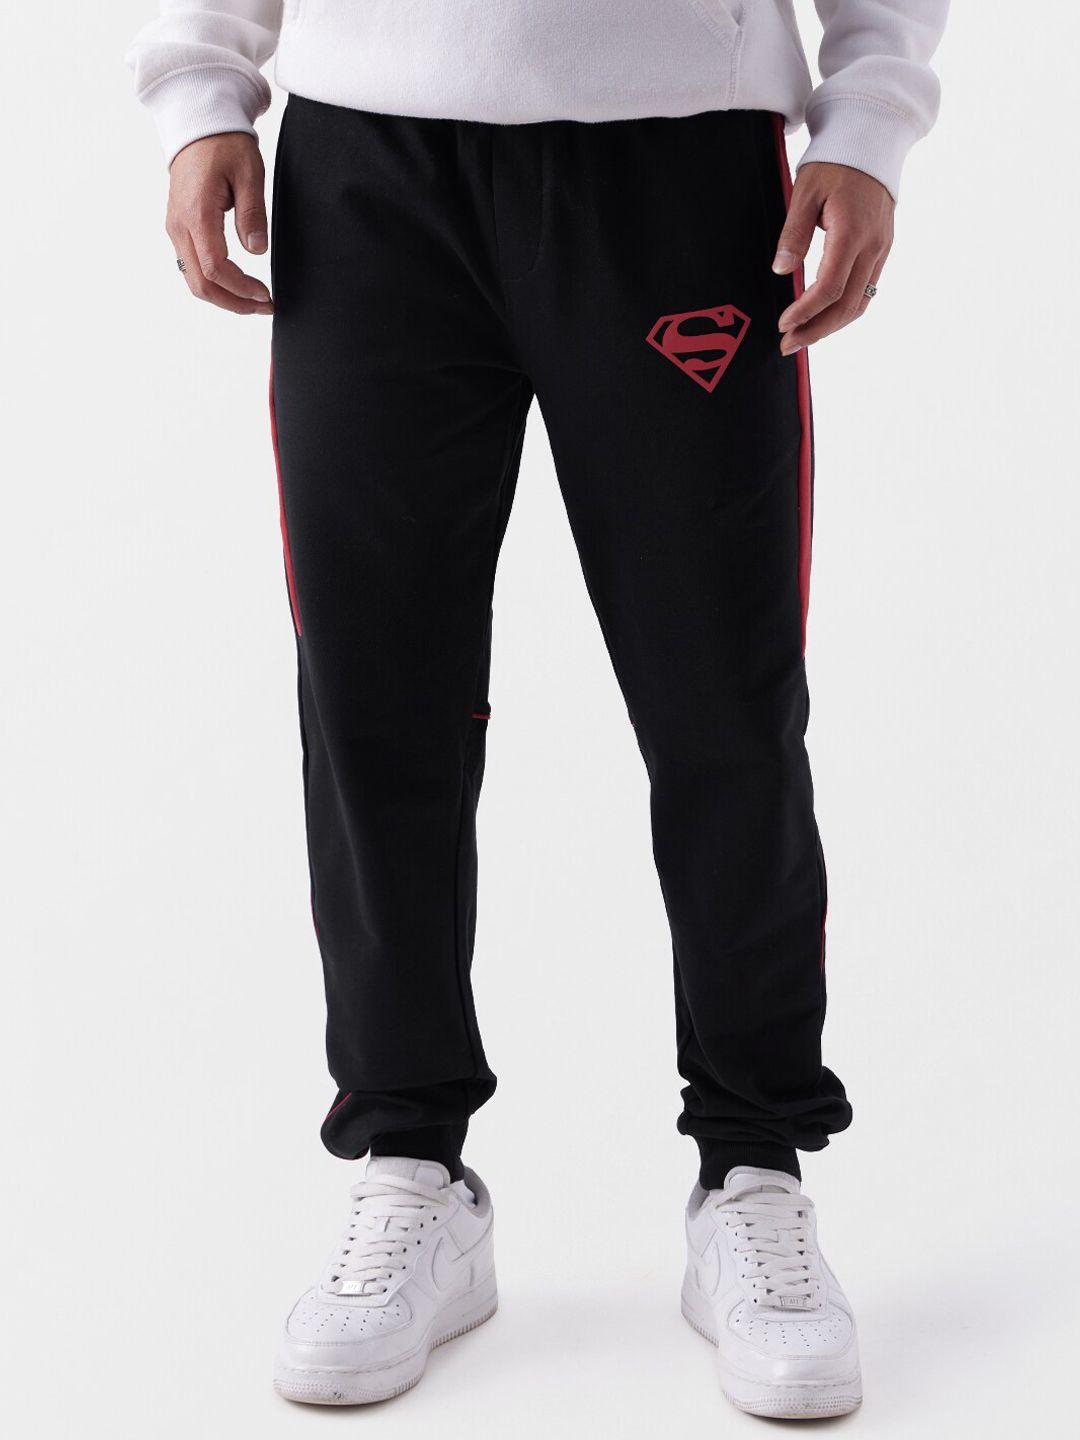 the-souled-store-men-superman-printed-pure-cotton-joggers